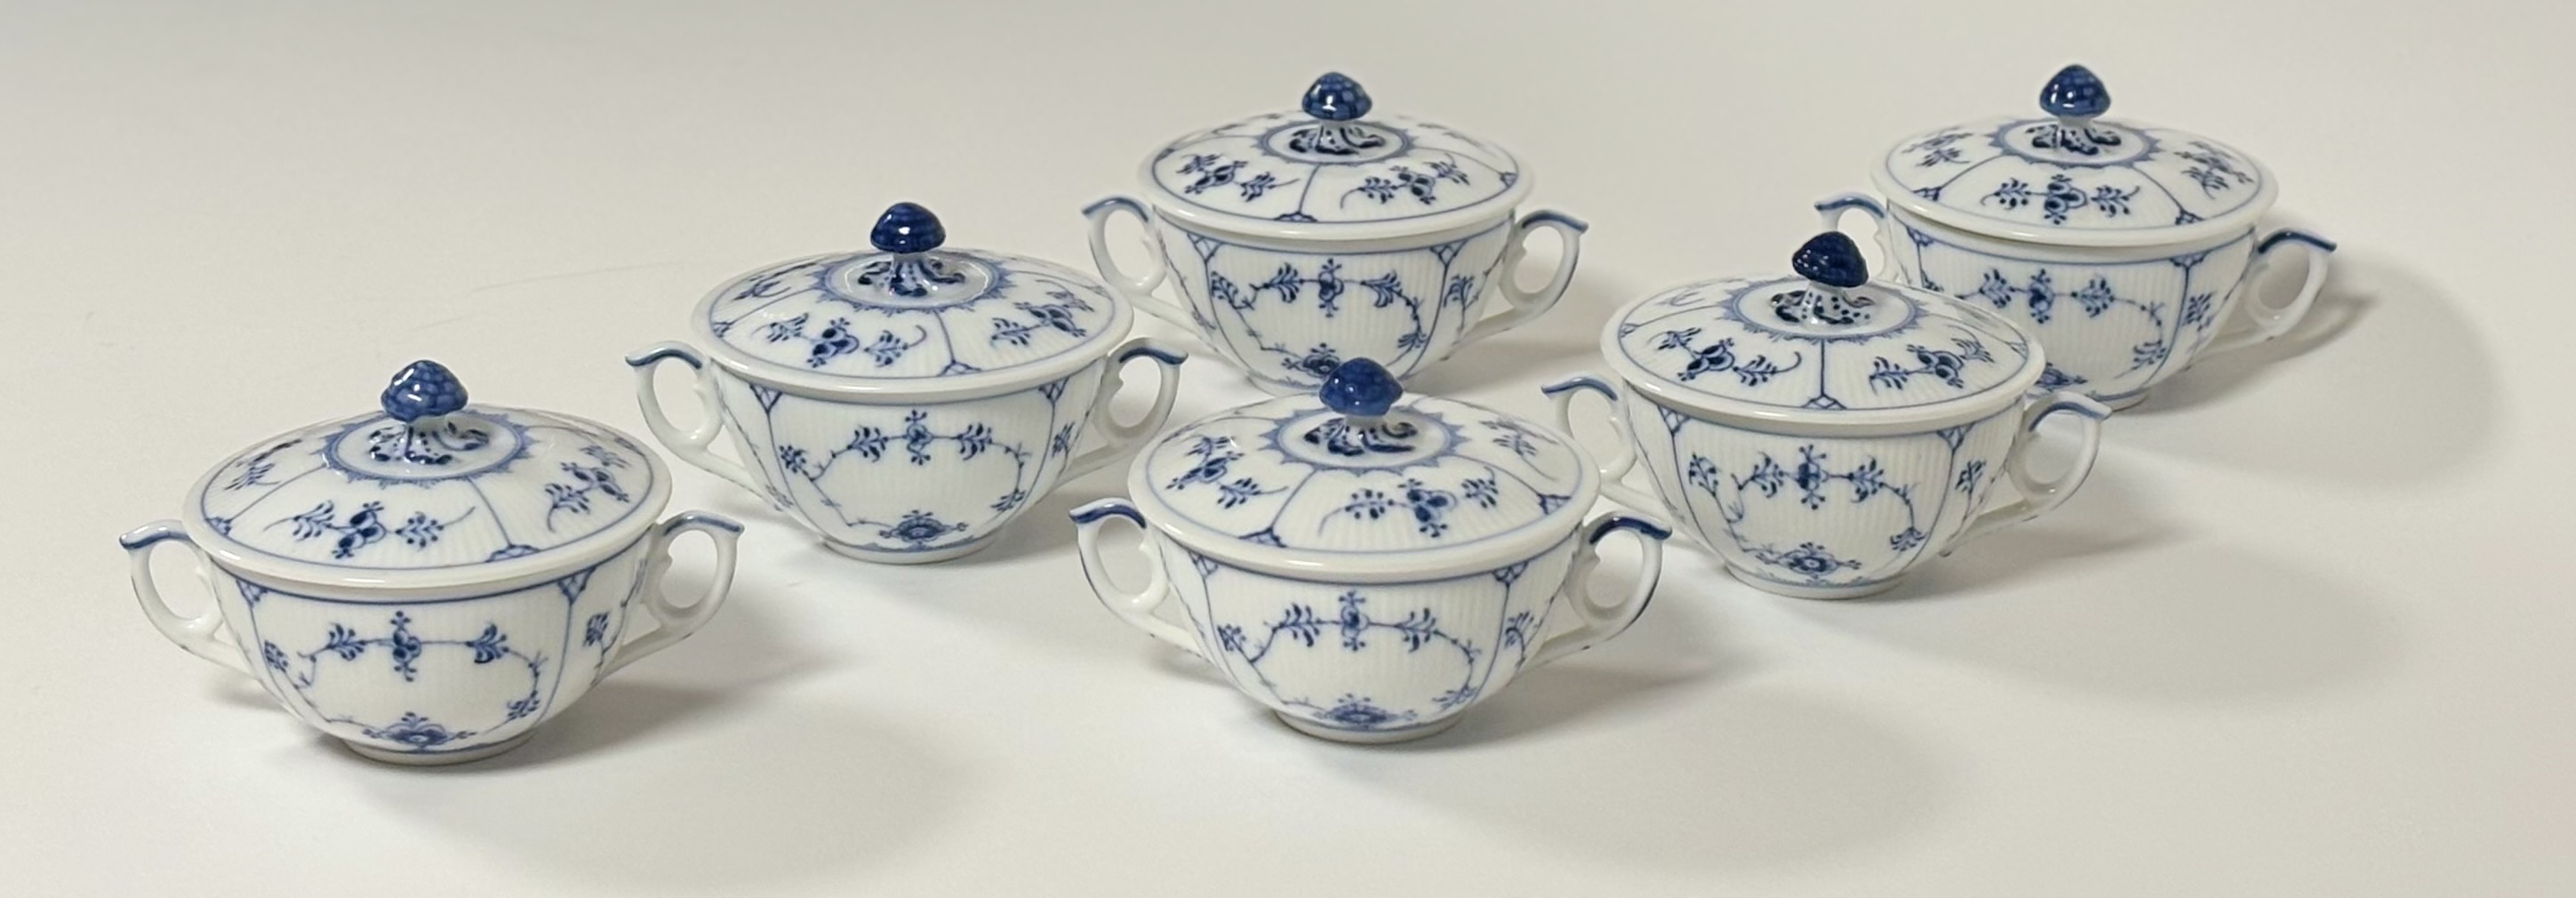 A set of six Royal Copenhagen soup cups and covers in the plain fluted blue pattern (Musselmalet),